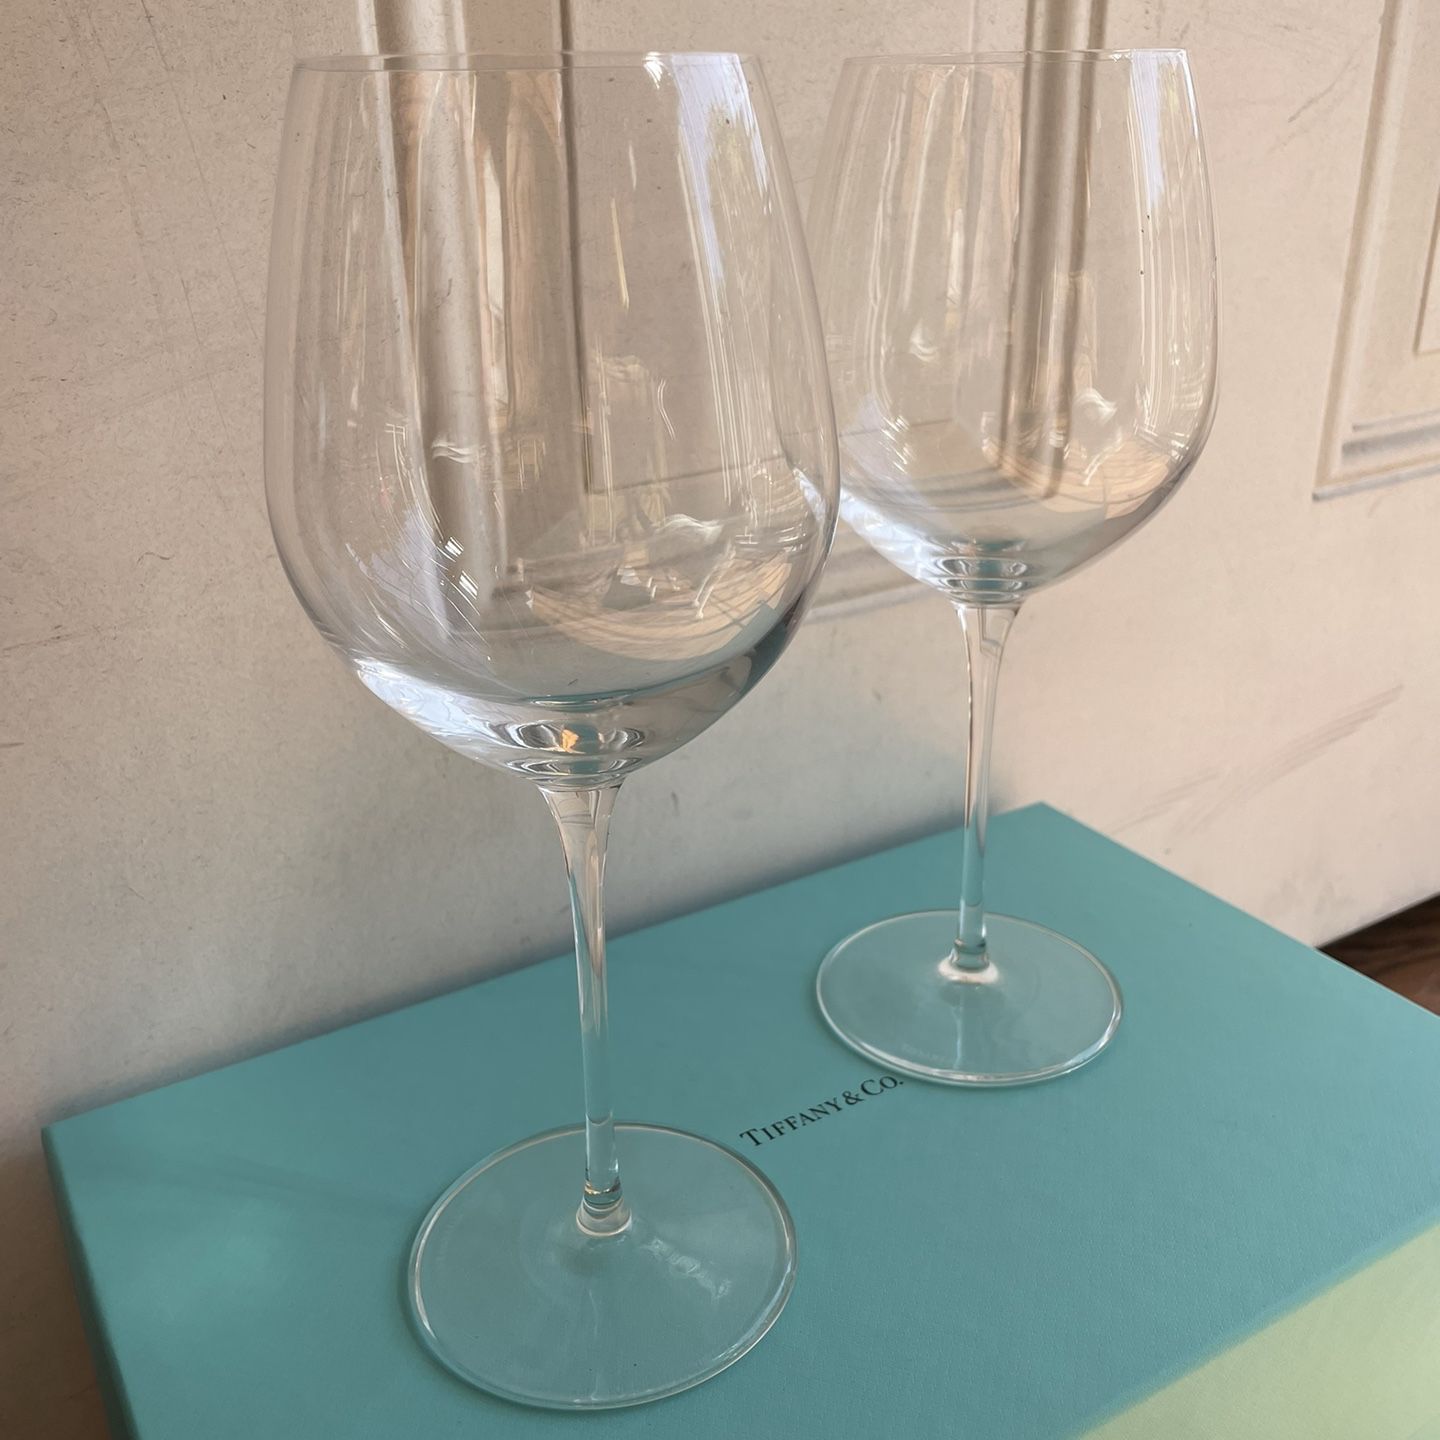 Gorgeous SWAROVSKI Wine Glasses Special occasion or any occasion Cups for  Sale in Anaheim, CA - OfferUp